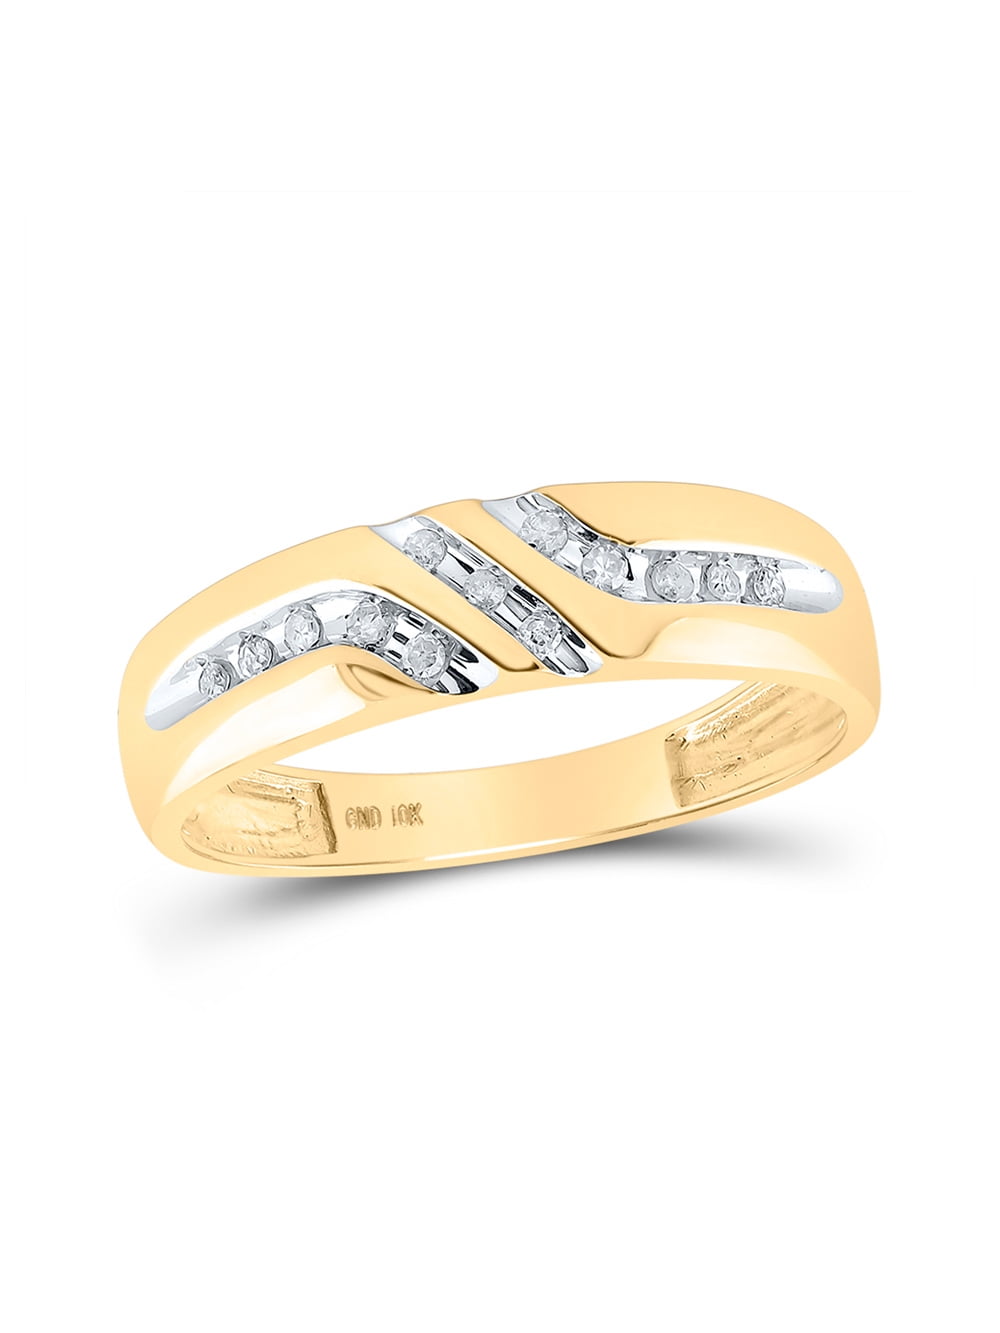 Size-8.75 1/5 cttw, Diamond Wedding Band in 10K Yellow Gold G-H,I2-I3